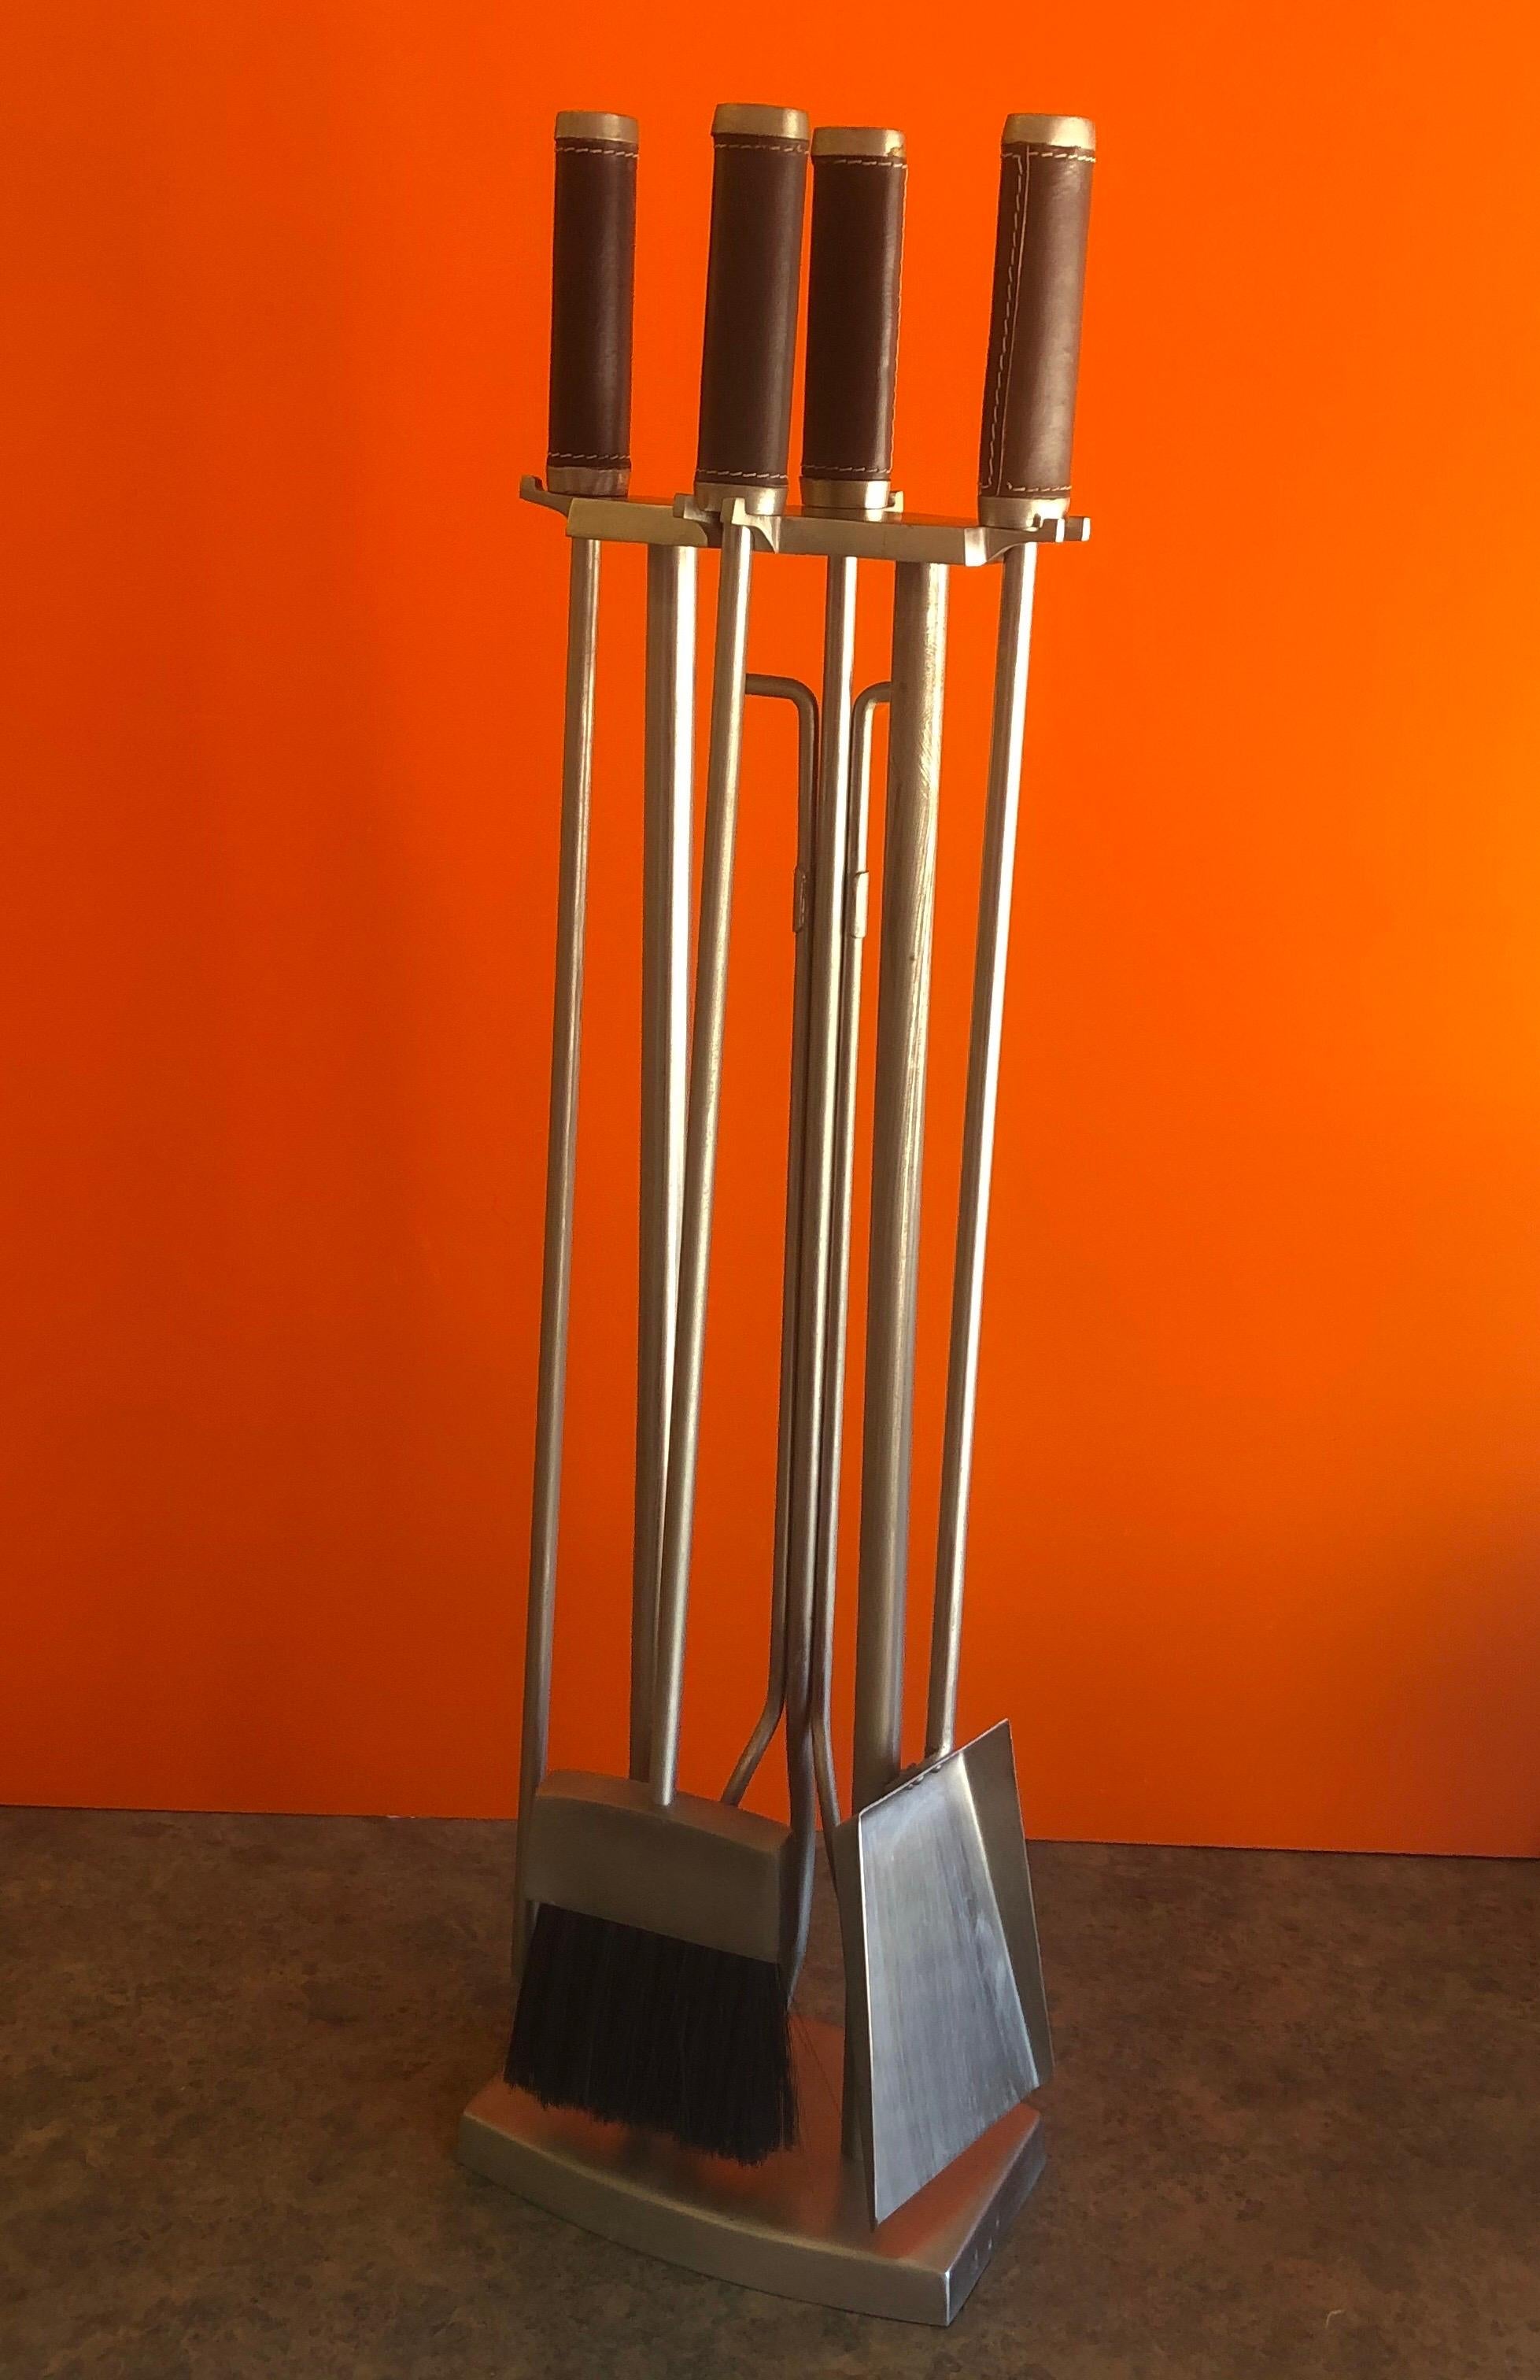 Modernist set of fire place tools in brushed steel with brown leather handles, circa 1970s. There are four tools (shovel, brush, log holder and poker) and a dual column stand in very good vintage condition. The set measures 32